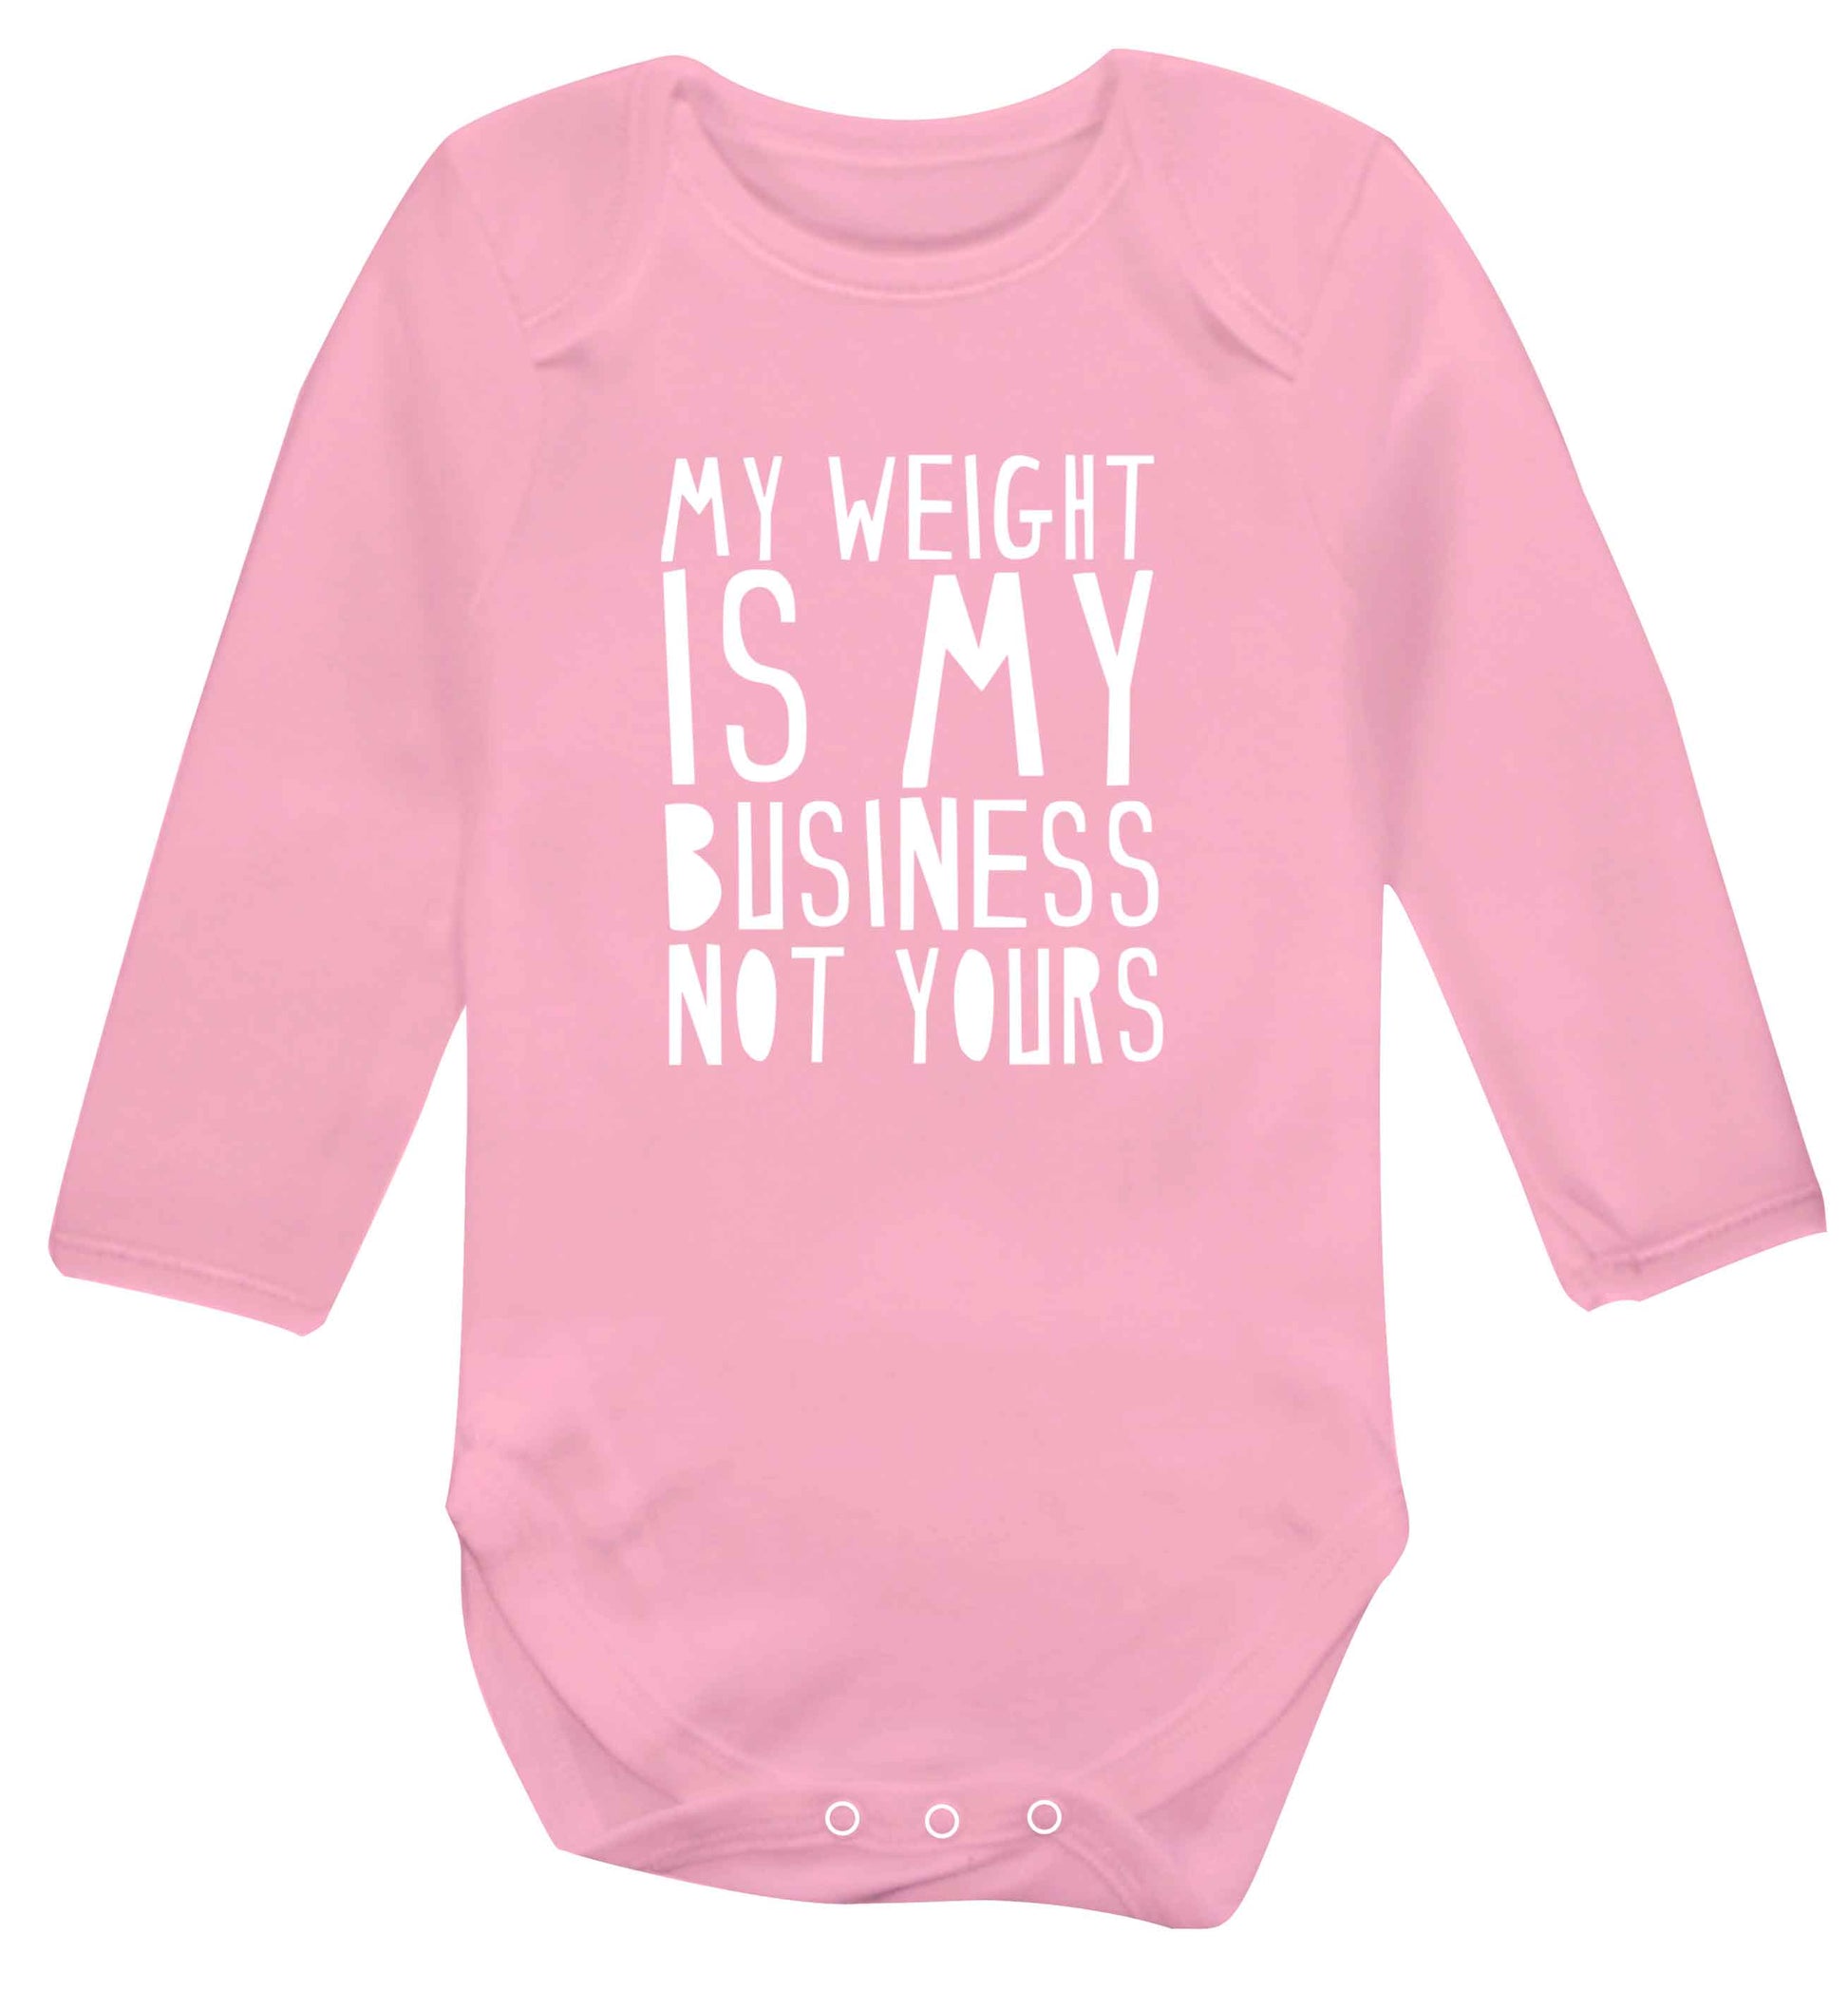 My weight is my business not yours baby vest long sleeved pale pink 6-12 months